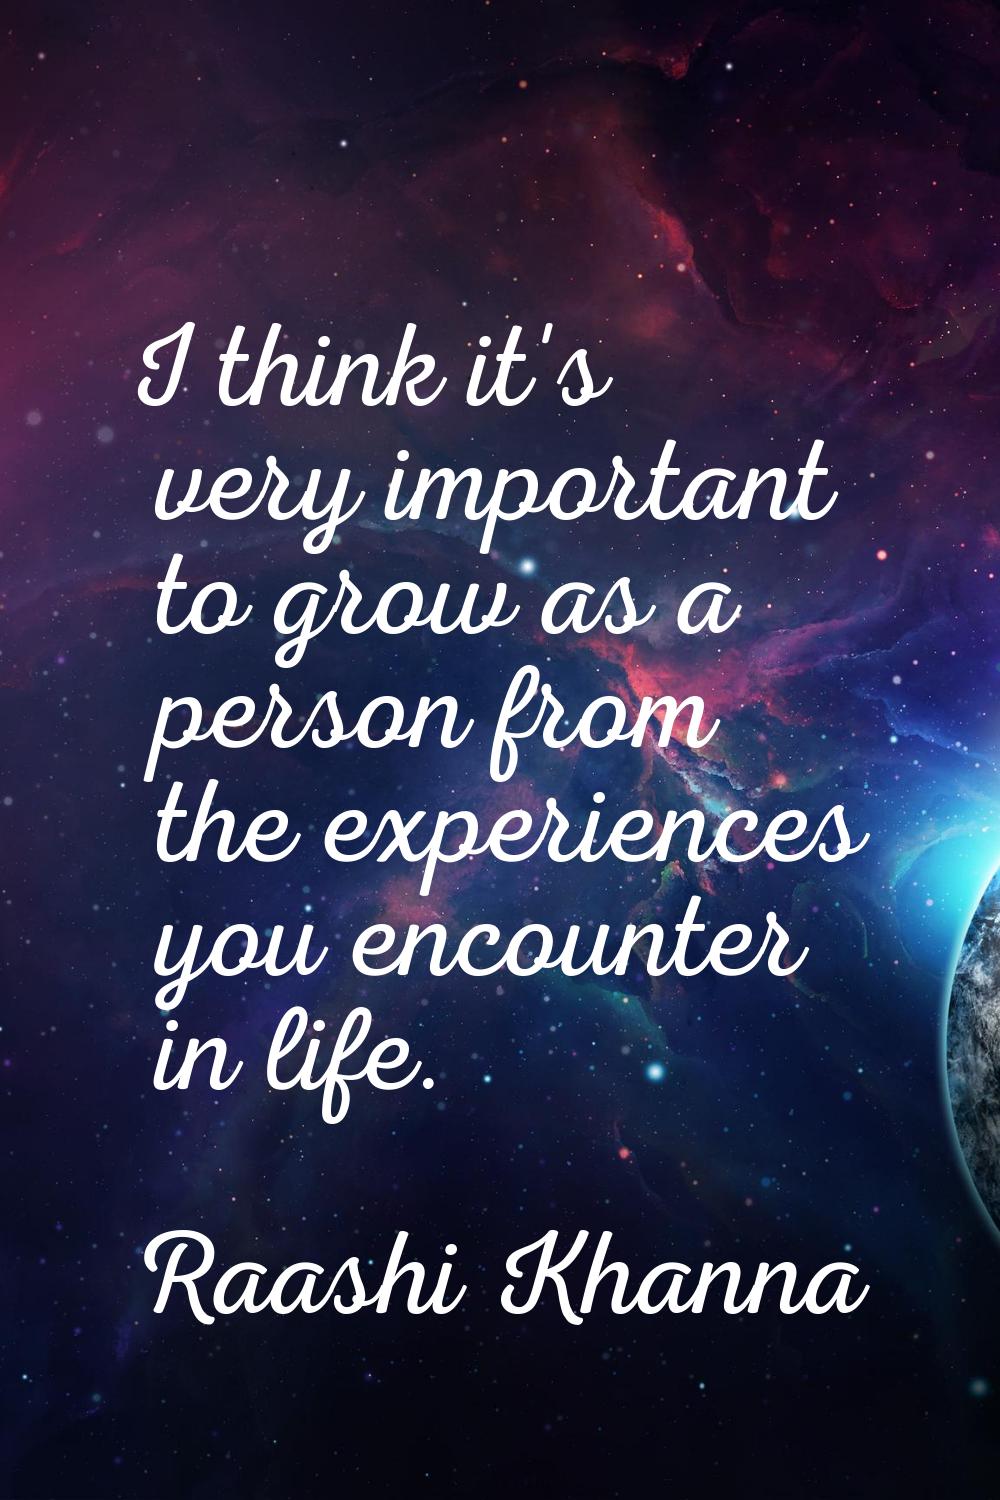 I think it's very important to grow as a person from the experiences you encounter in life.